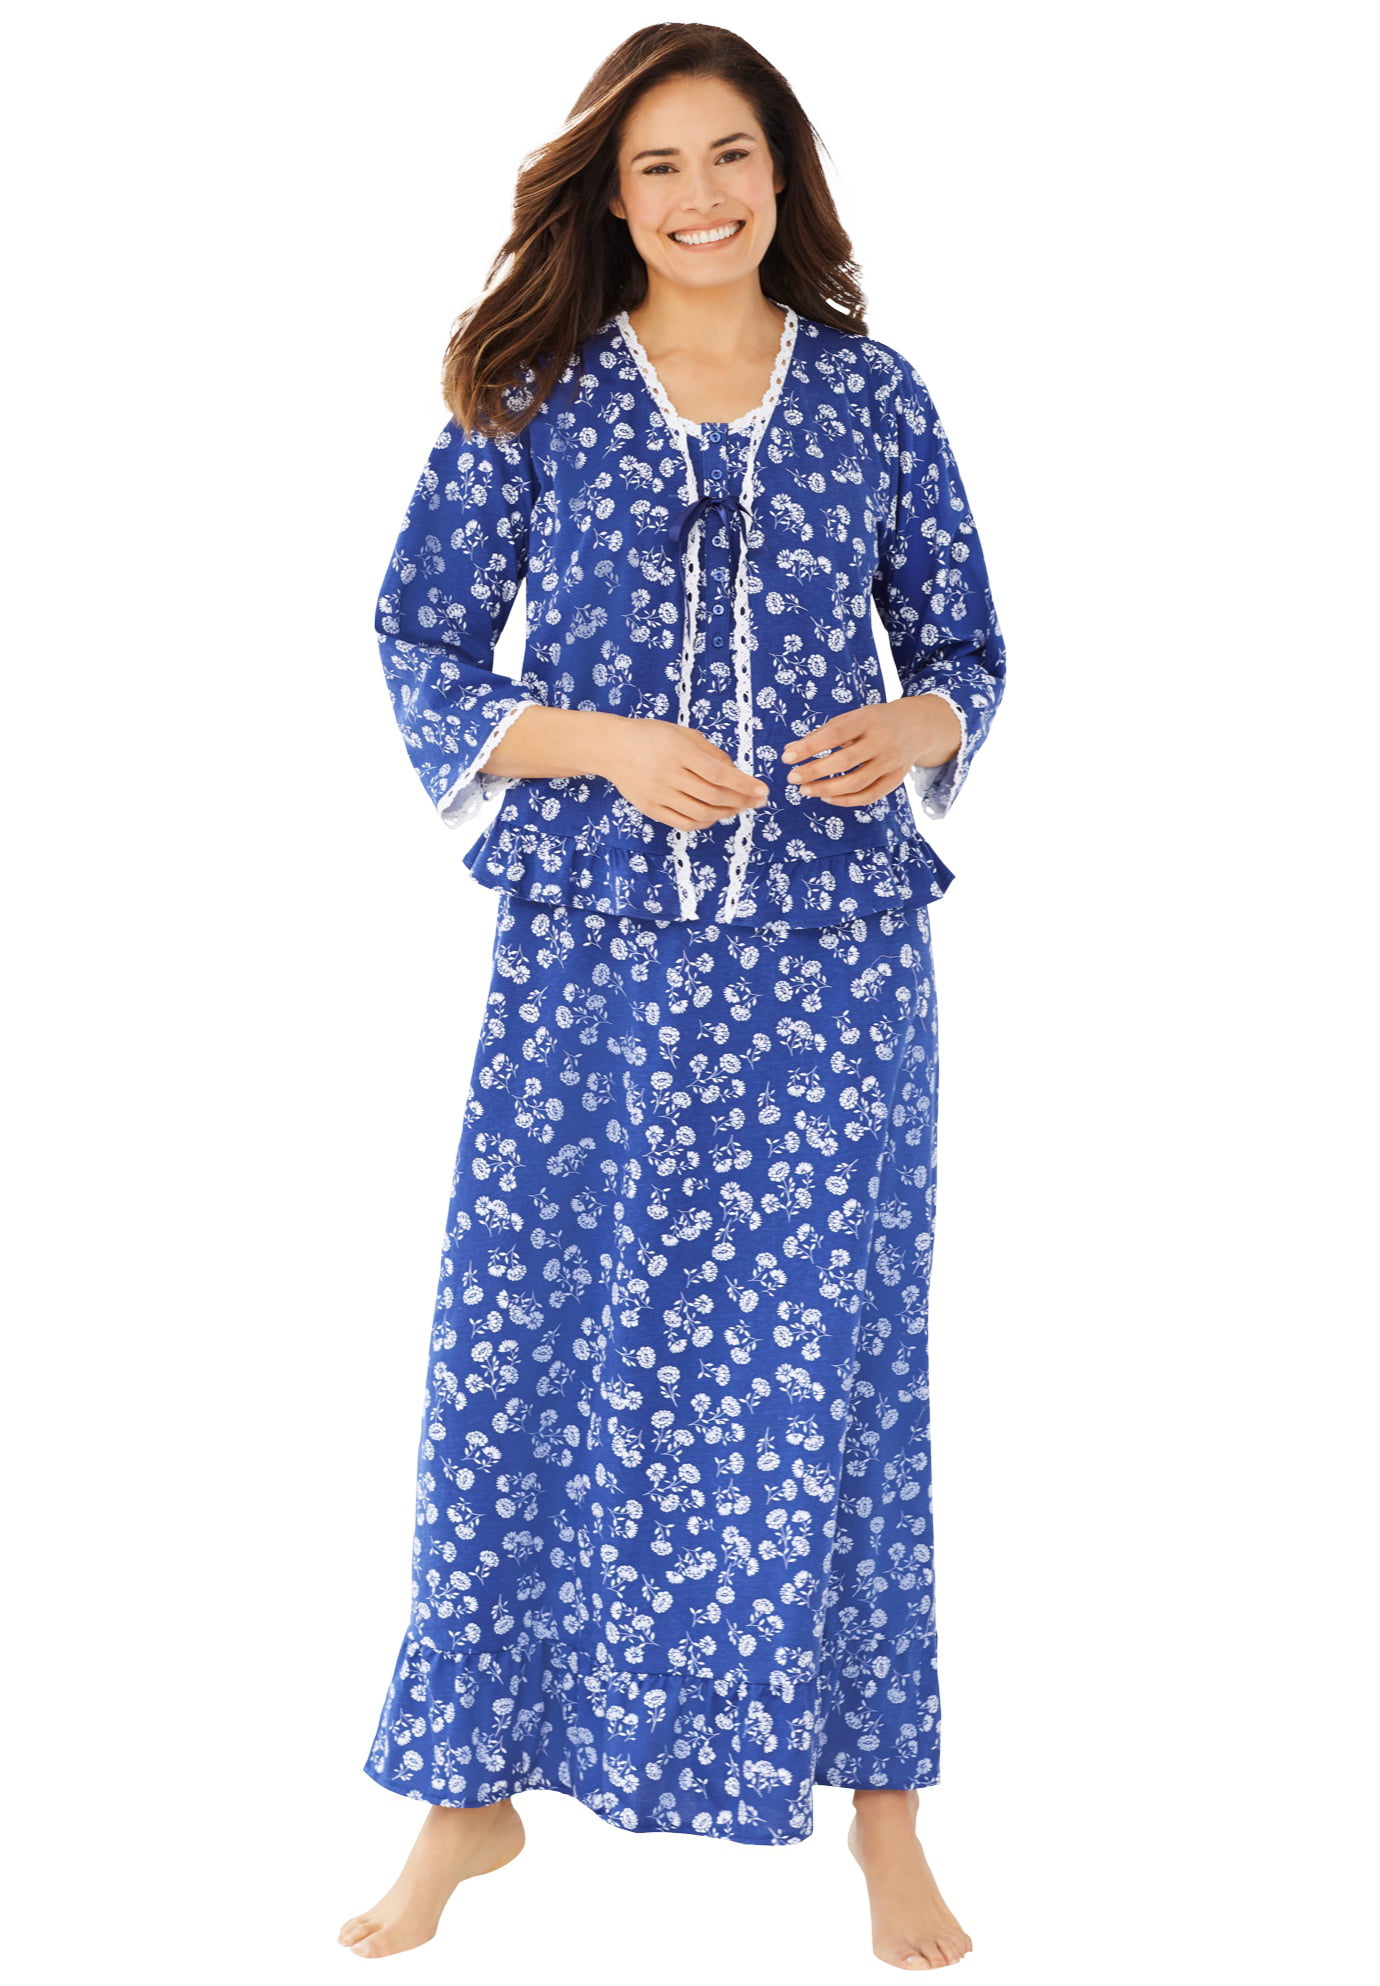 Only Necessities - Only Necessities Women's Plus Size 2-Piece Nightgown ...